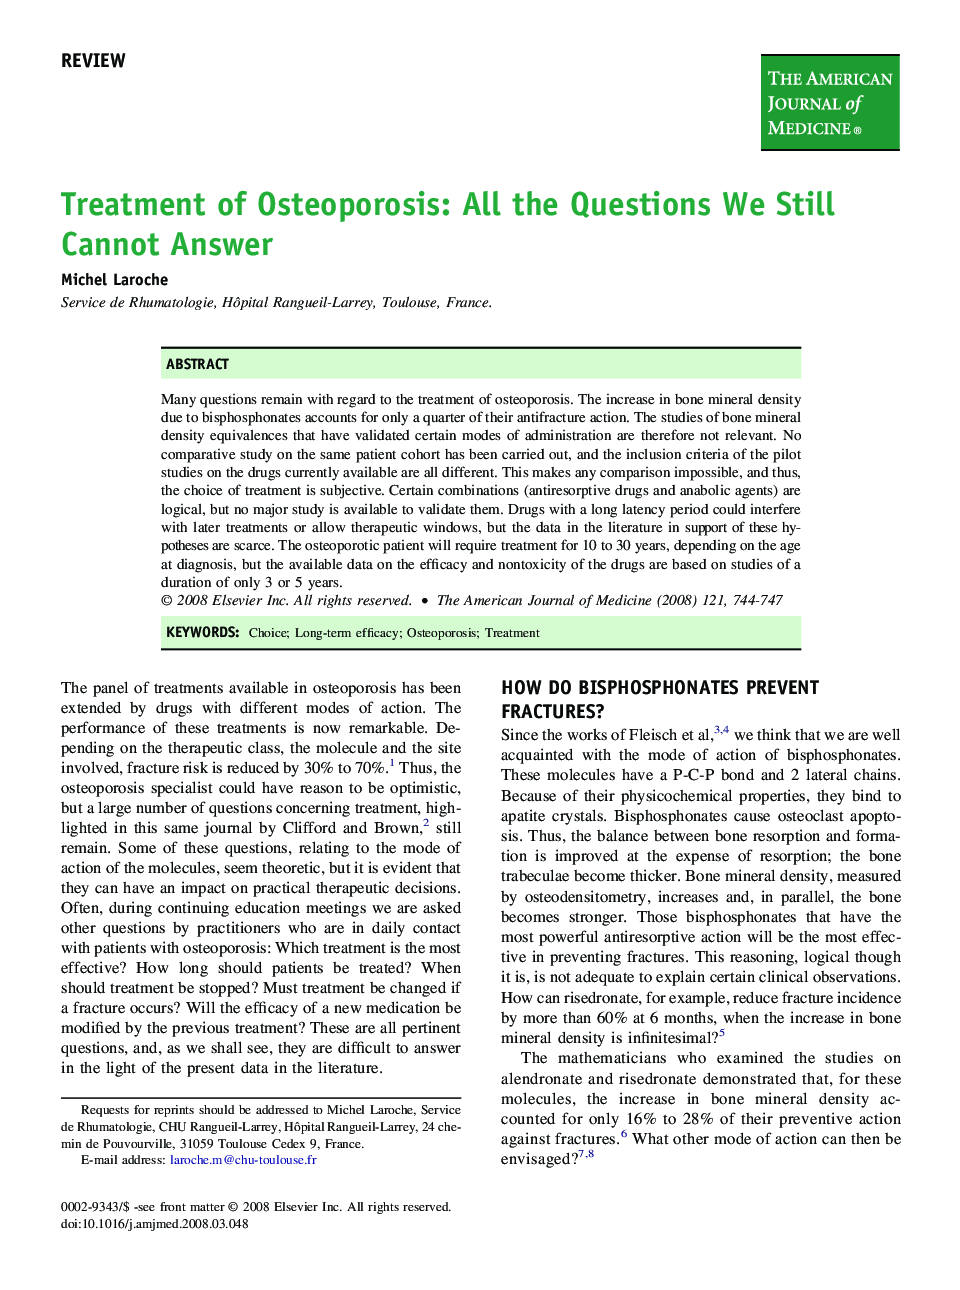 Treatment of Osteoporosis: All the Questions We Still Cannot Answer